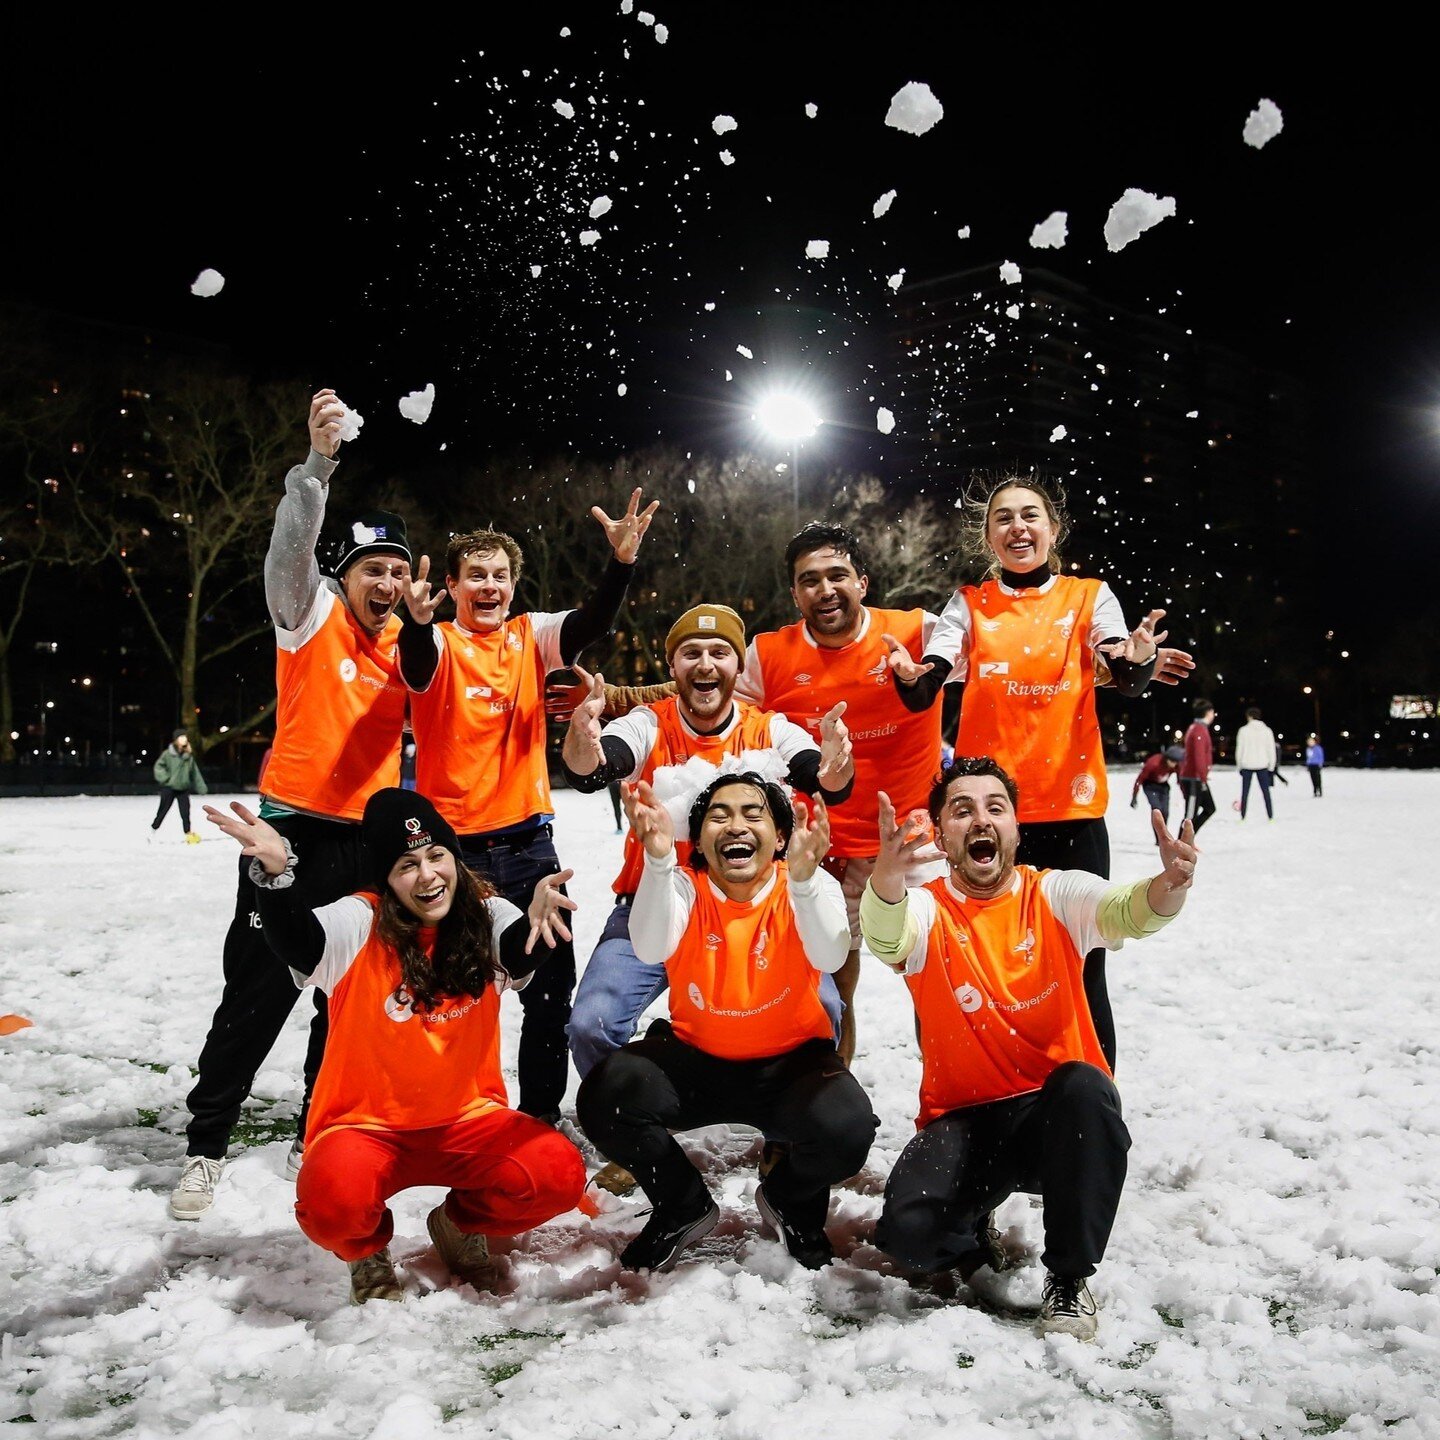 When teams say they don't play in the snow... We say we that's a wrap on one of the best Winter Footy seasons yet ❄️⁠
⁠
#winterteamphoto #snowysnaps #winterwarrior #snowball #nycfooty #footyislife⁠